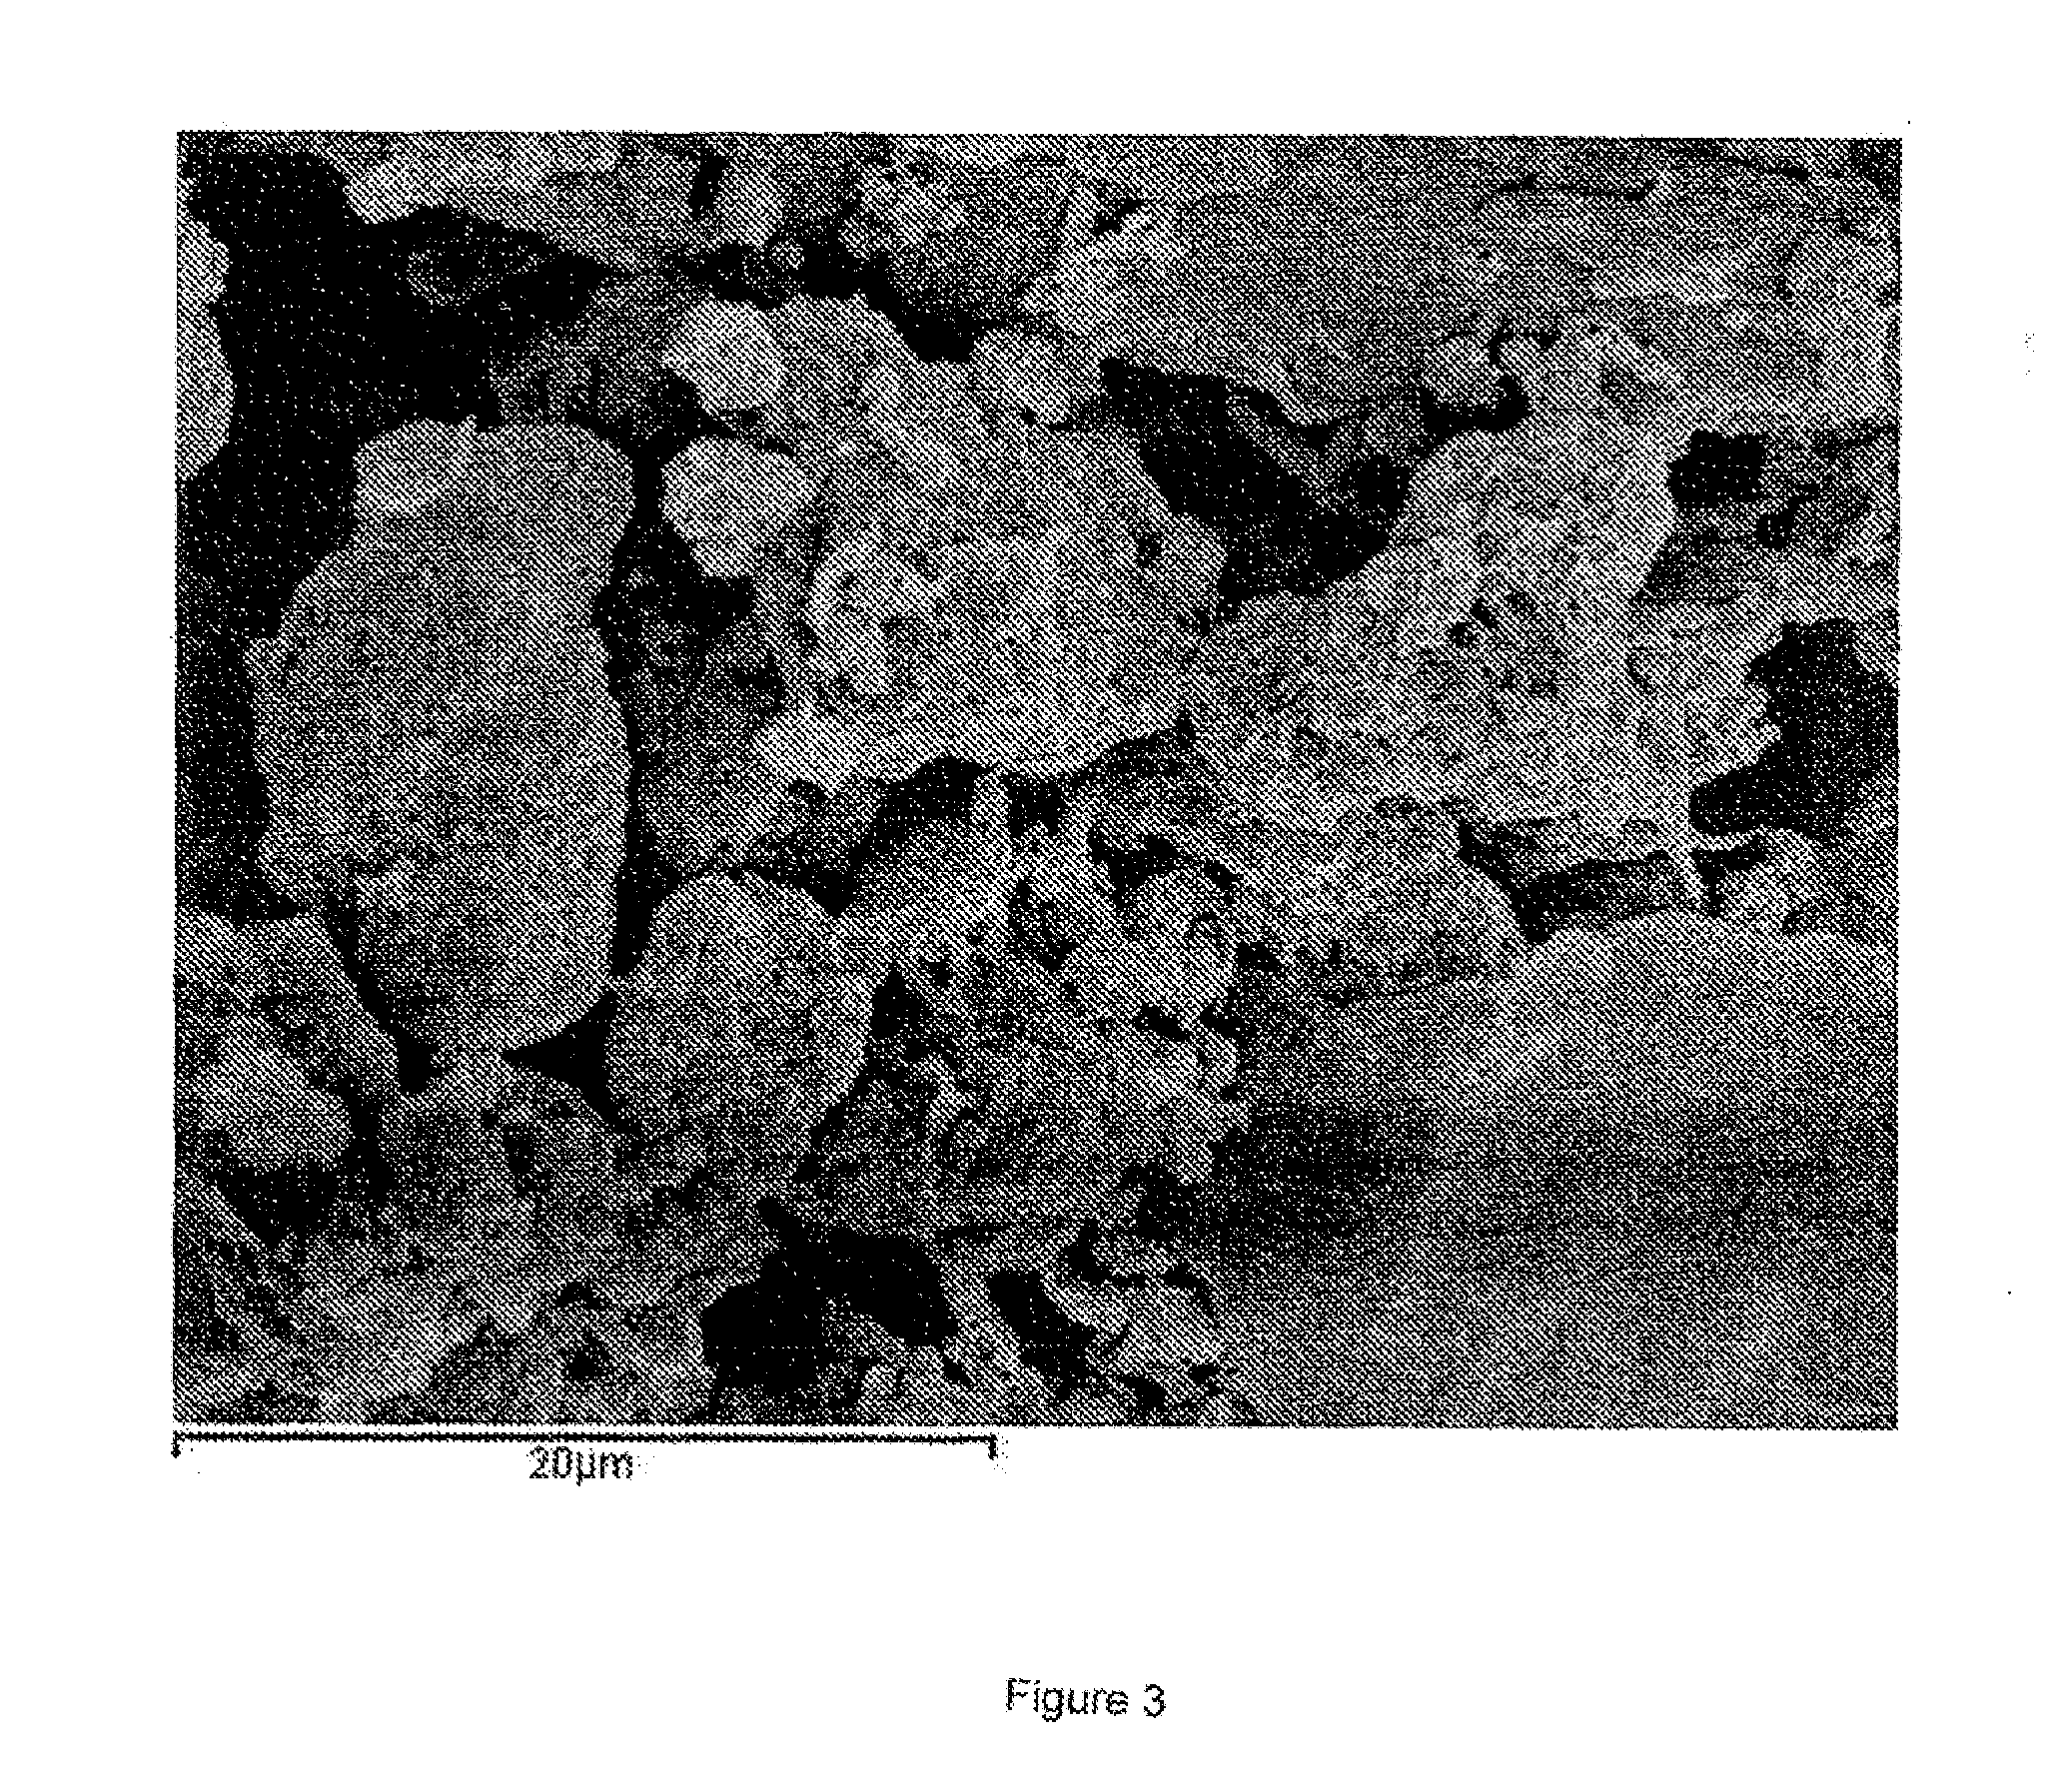 Polymeric material of photosynthetic origin comprising particulate inorganic material